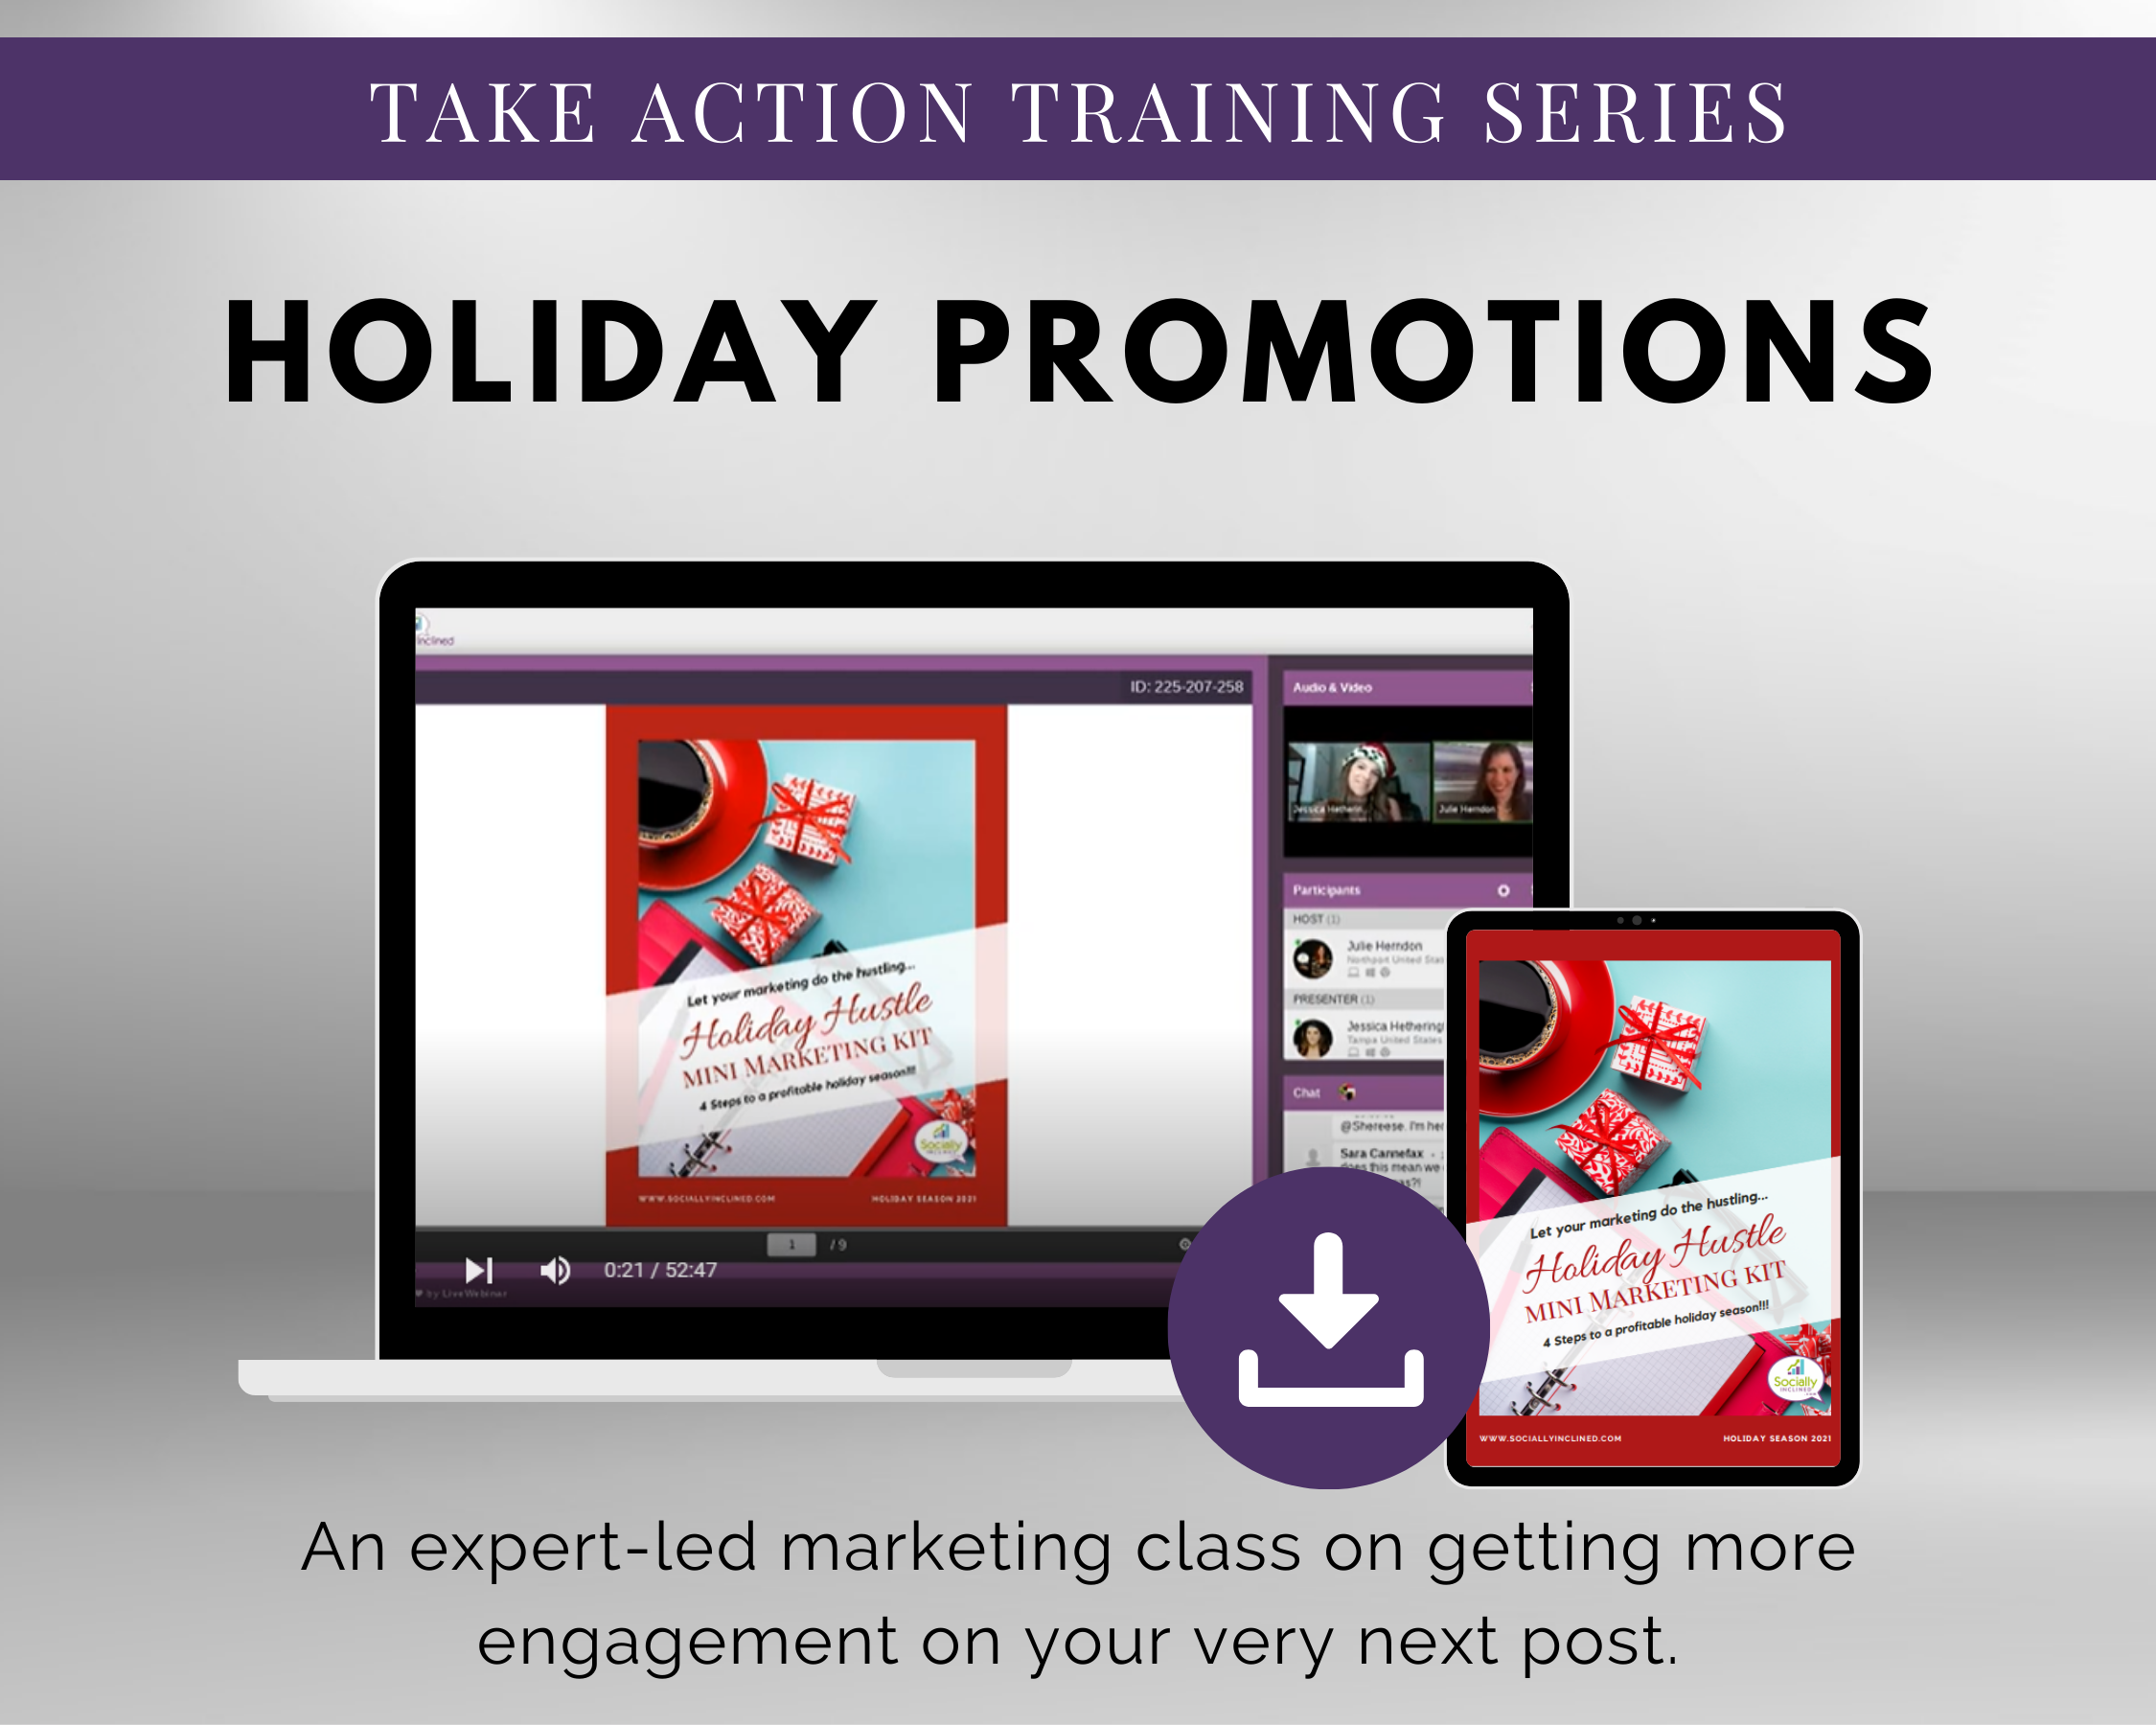 Take action training series featuring the TAT - Holiday Promotions Masterclass by Get Socially Inclined.